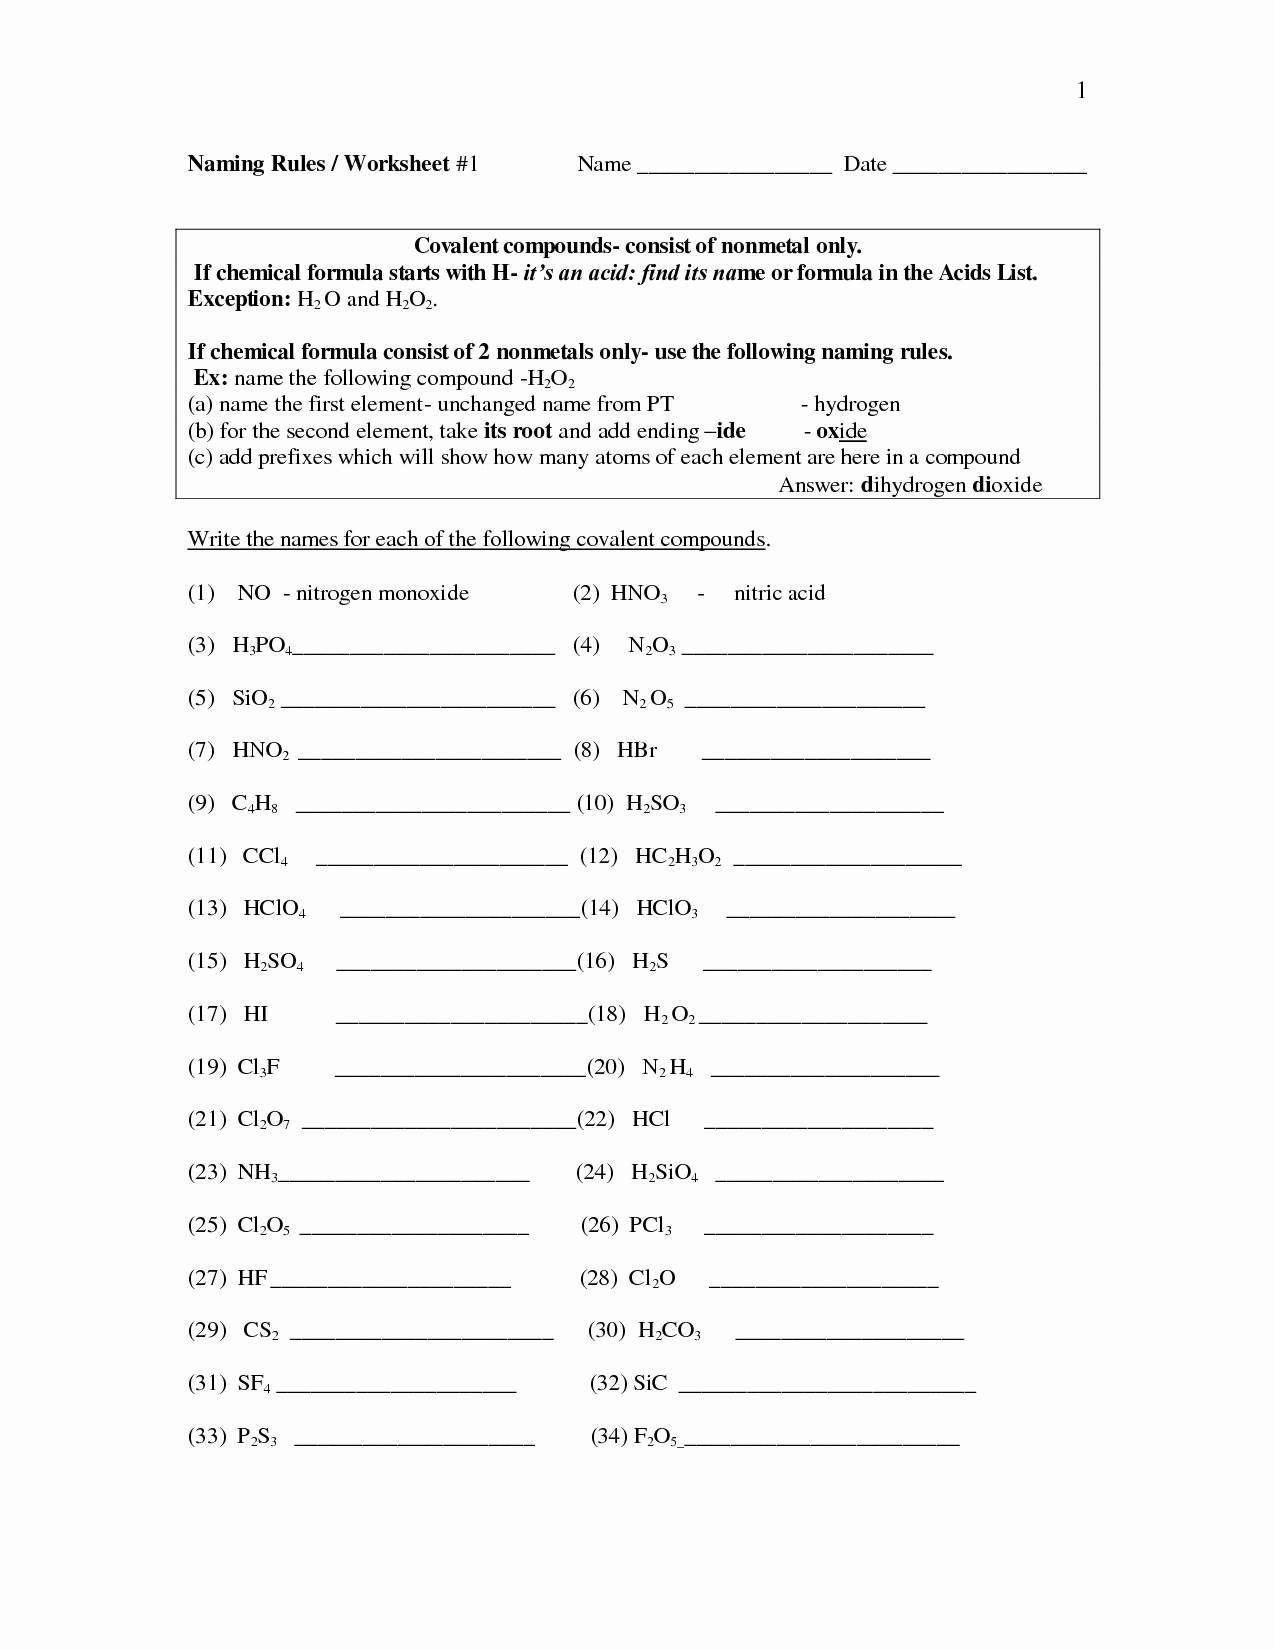 Naming Binary Ionic Compounds Worksheet Luxury 15 Best Of Practice Naming Acids Worksheet Naming